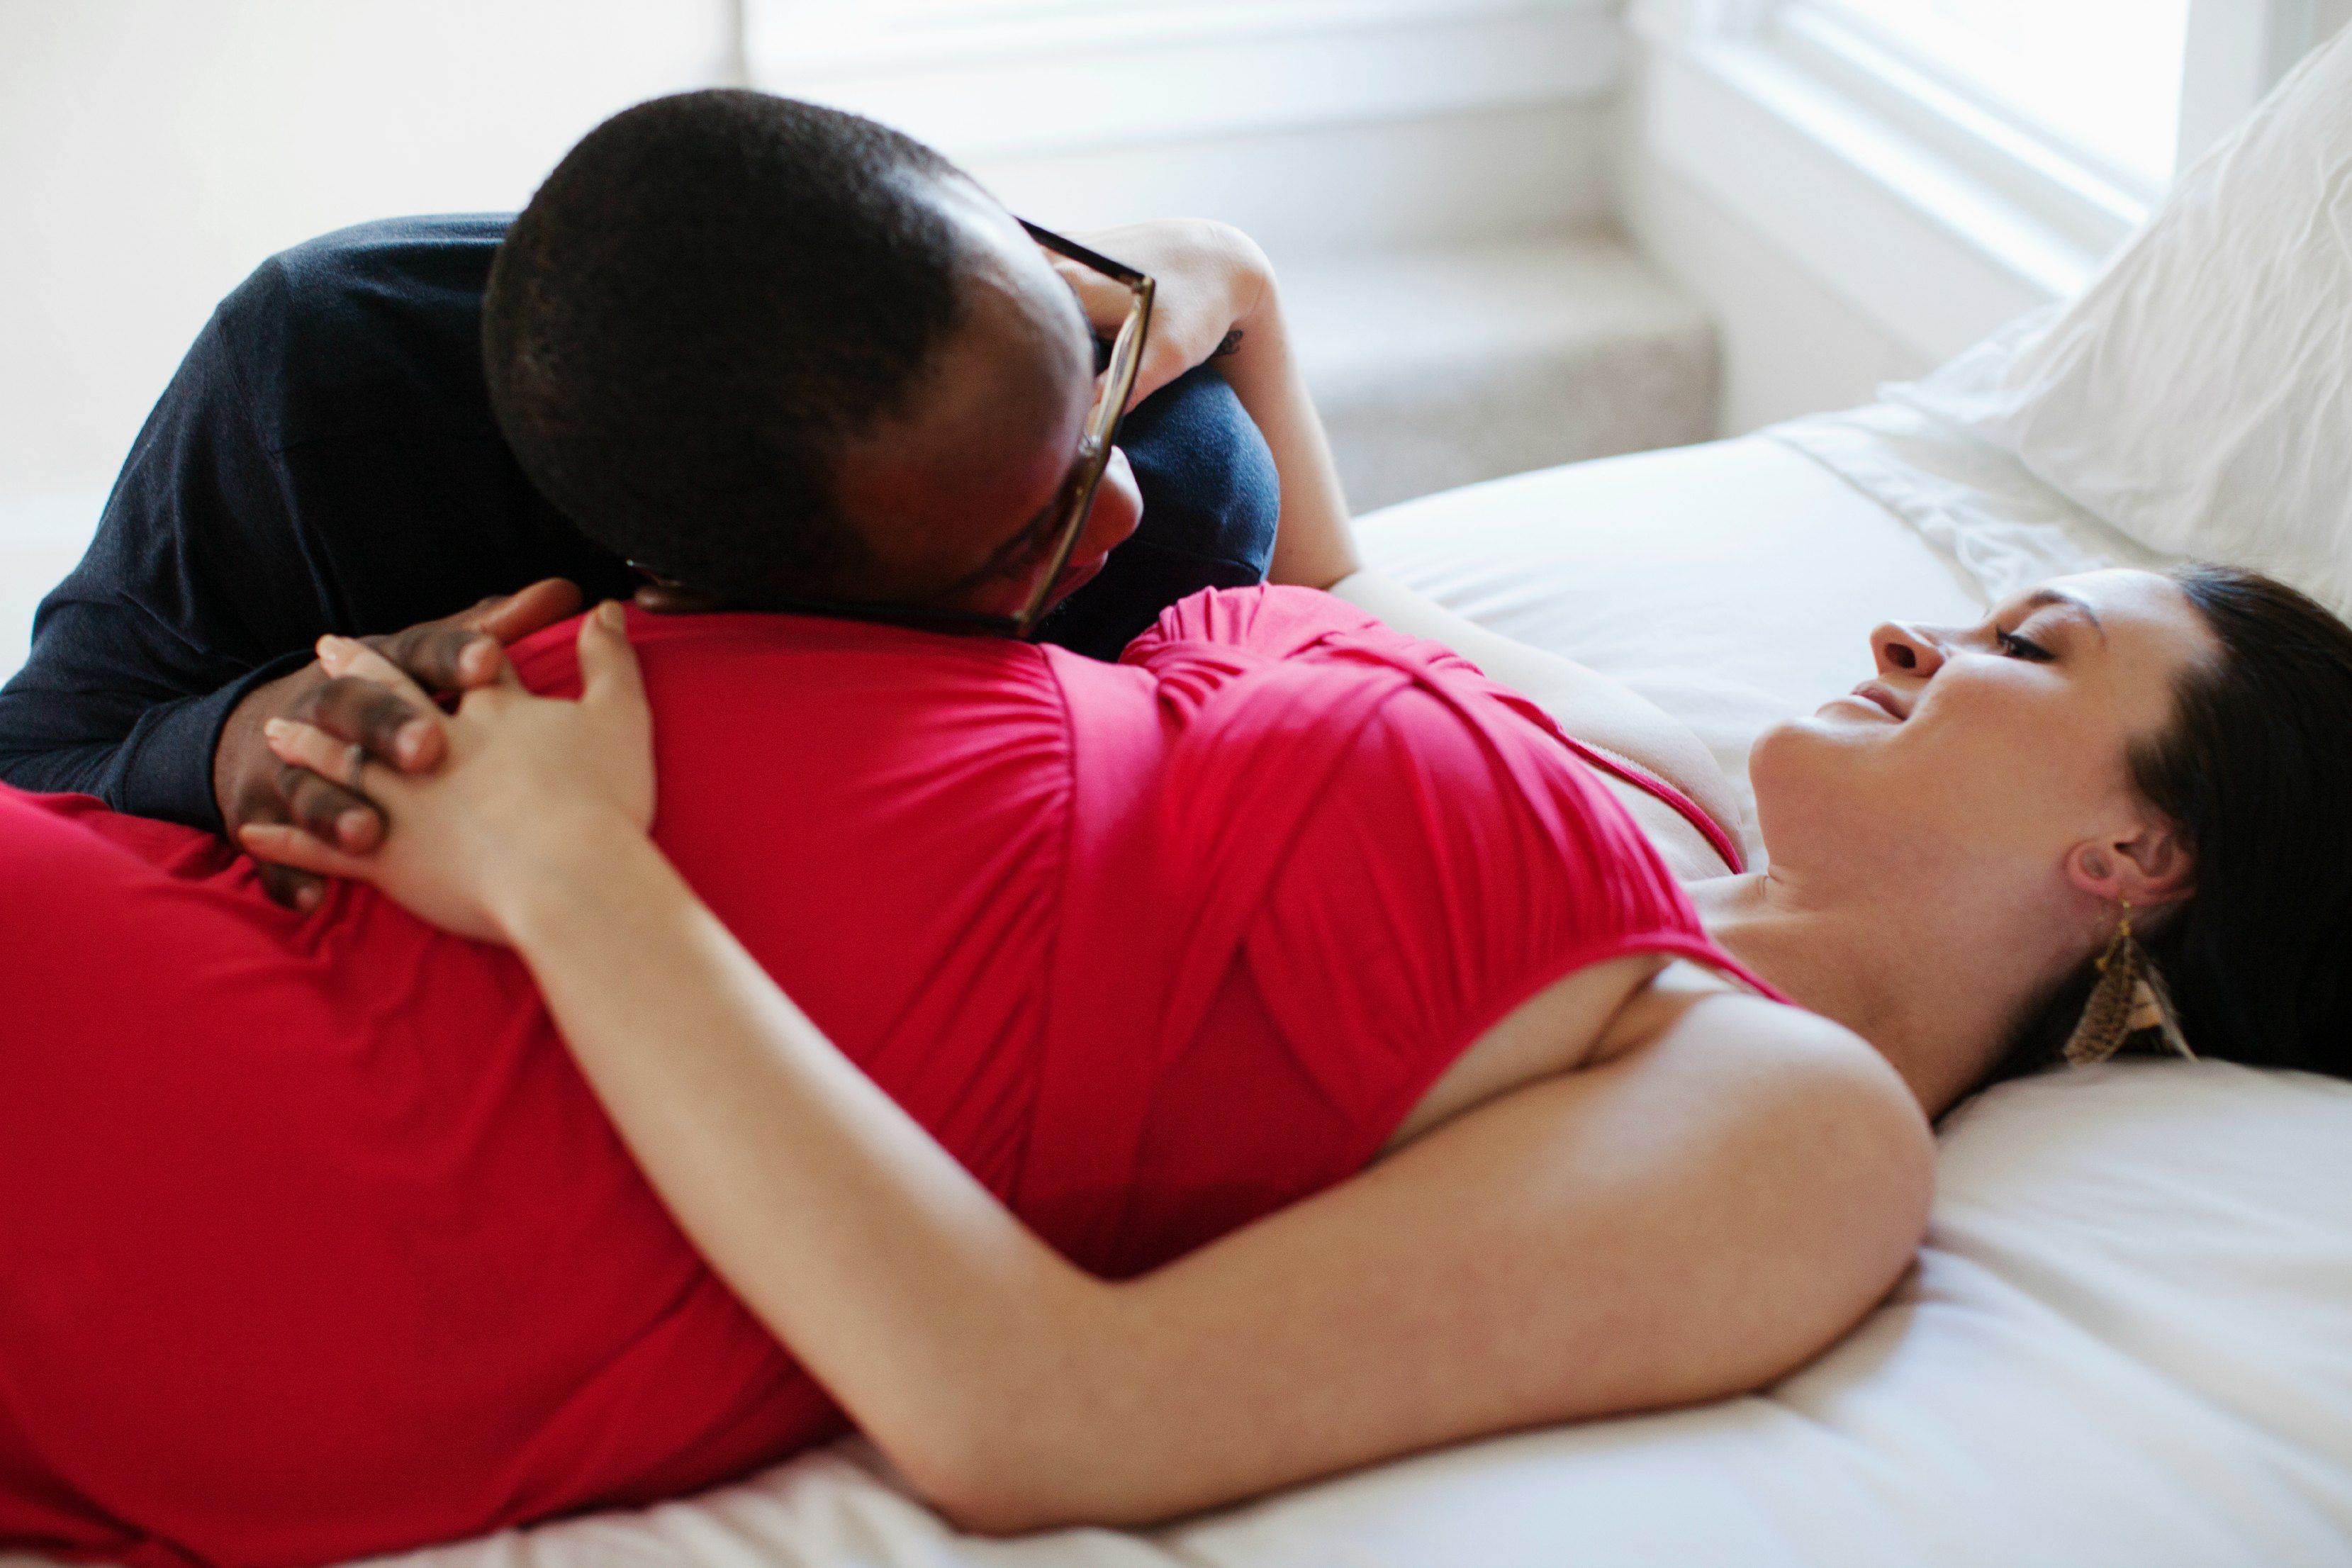 The number of times you need to have sex to get pregnant